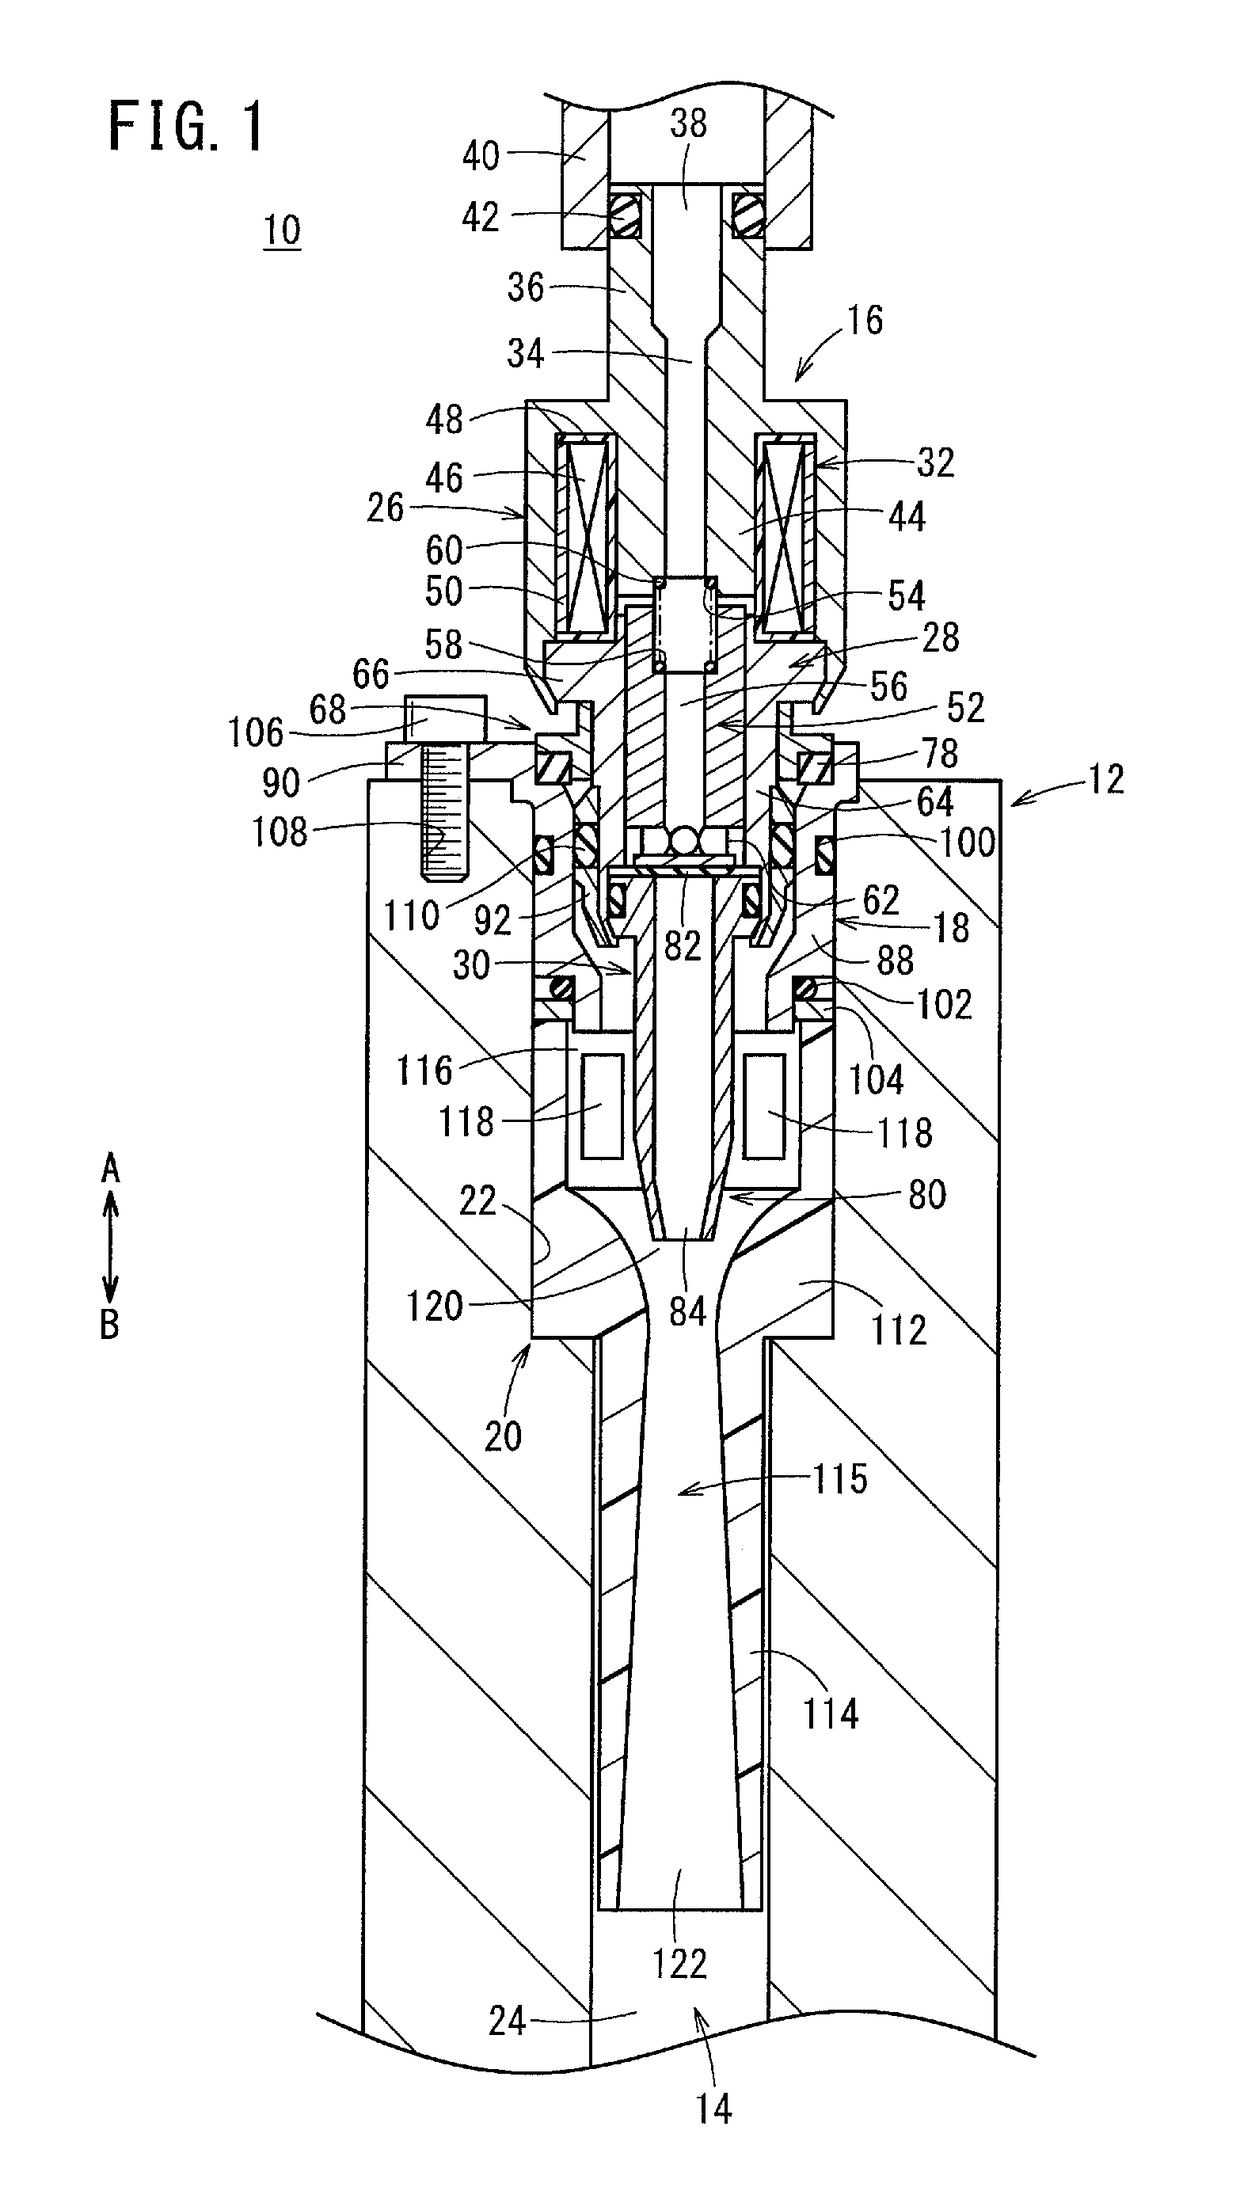 Hydrogen injection apparatus